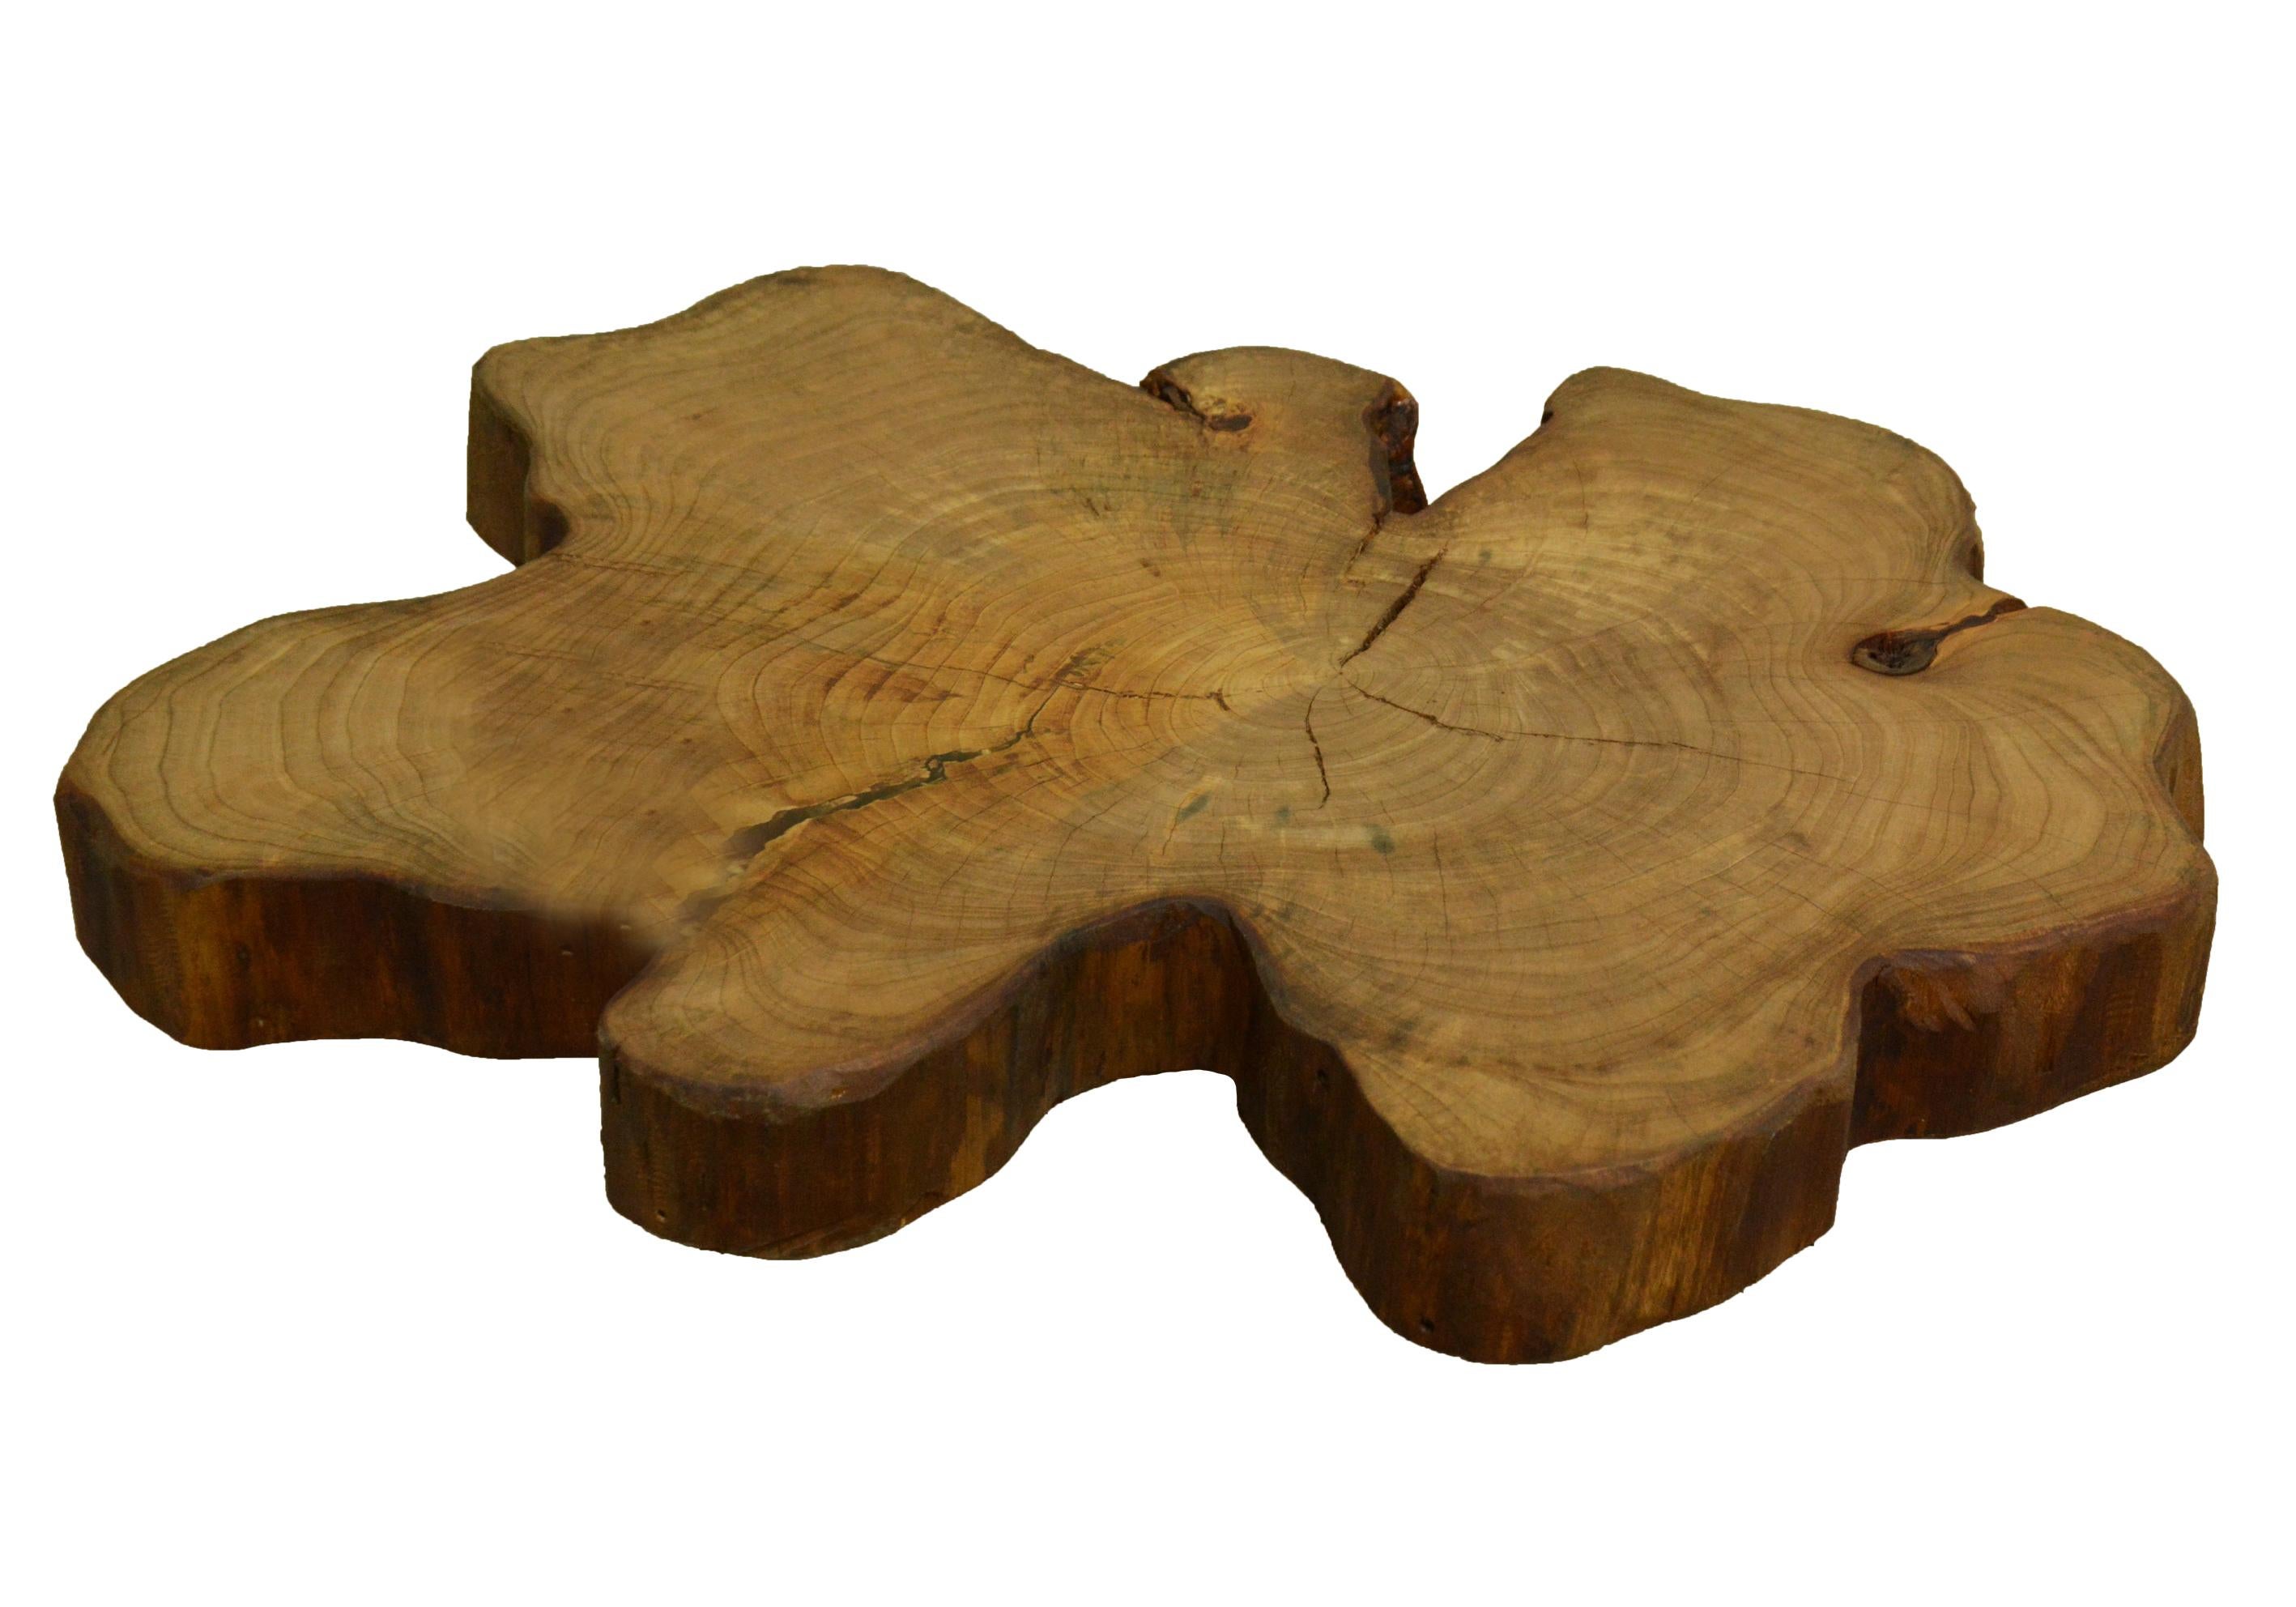 Wood type: Redwood tree

Base: Metal hairpin legs/ black

Introduce a raw naturalistic style to your living space with a naturalist live edge coffee table. Using only salvaged wood, it takes a hunter’s eye to recognize them in the wild. It takes